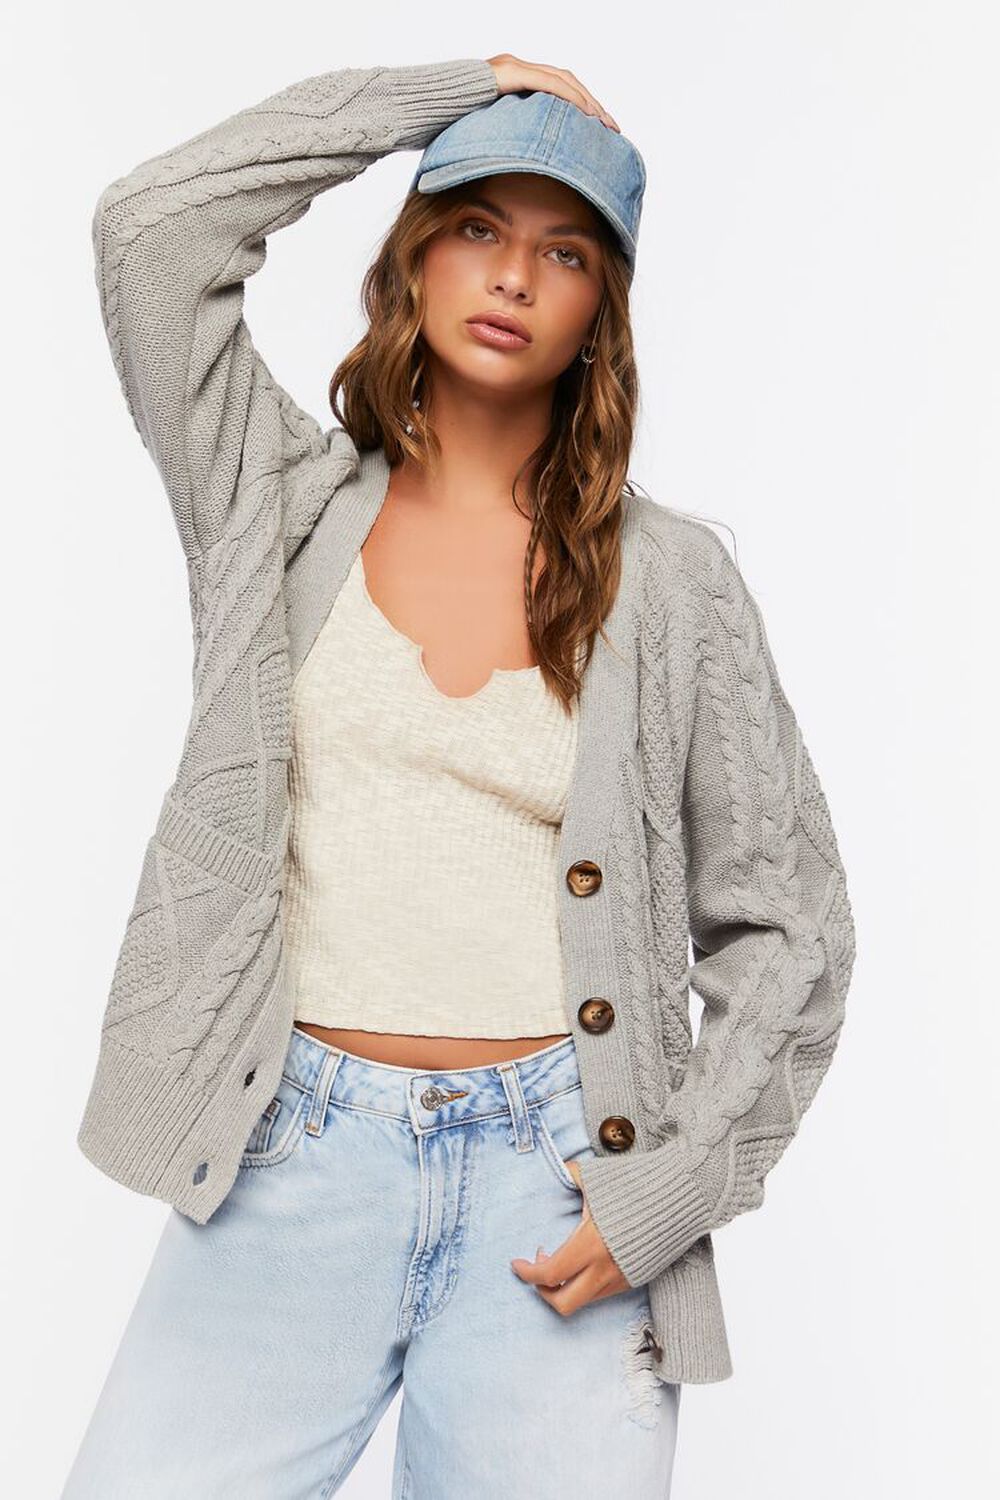 GREY Cable Knit Cardigan Sweater, image 1